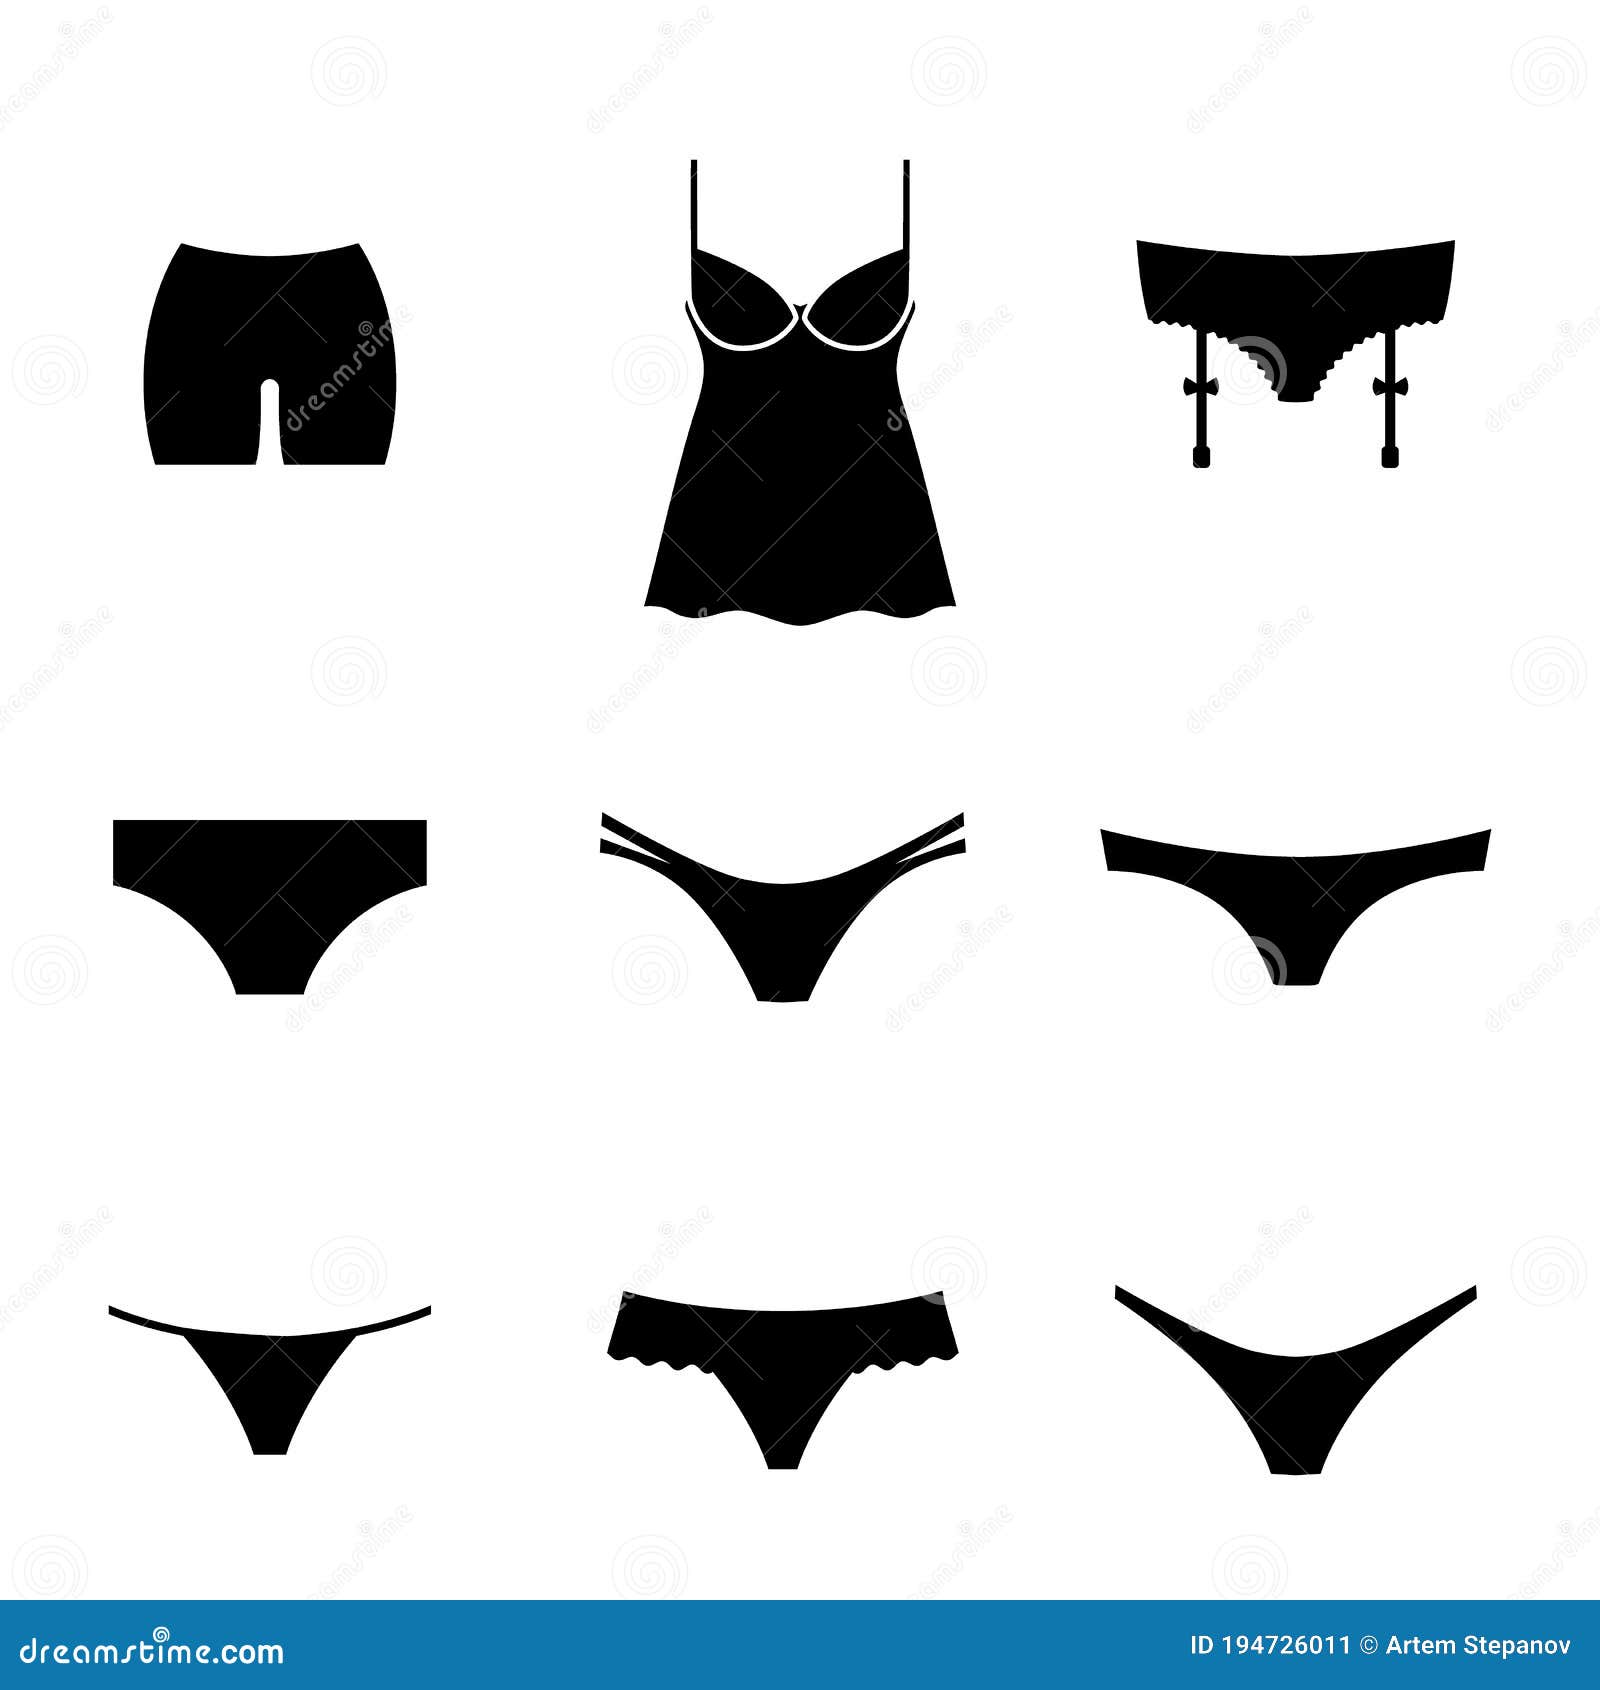 Underwear, Lingerie Signs, Negligee Symbols, Panties Silhouettes